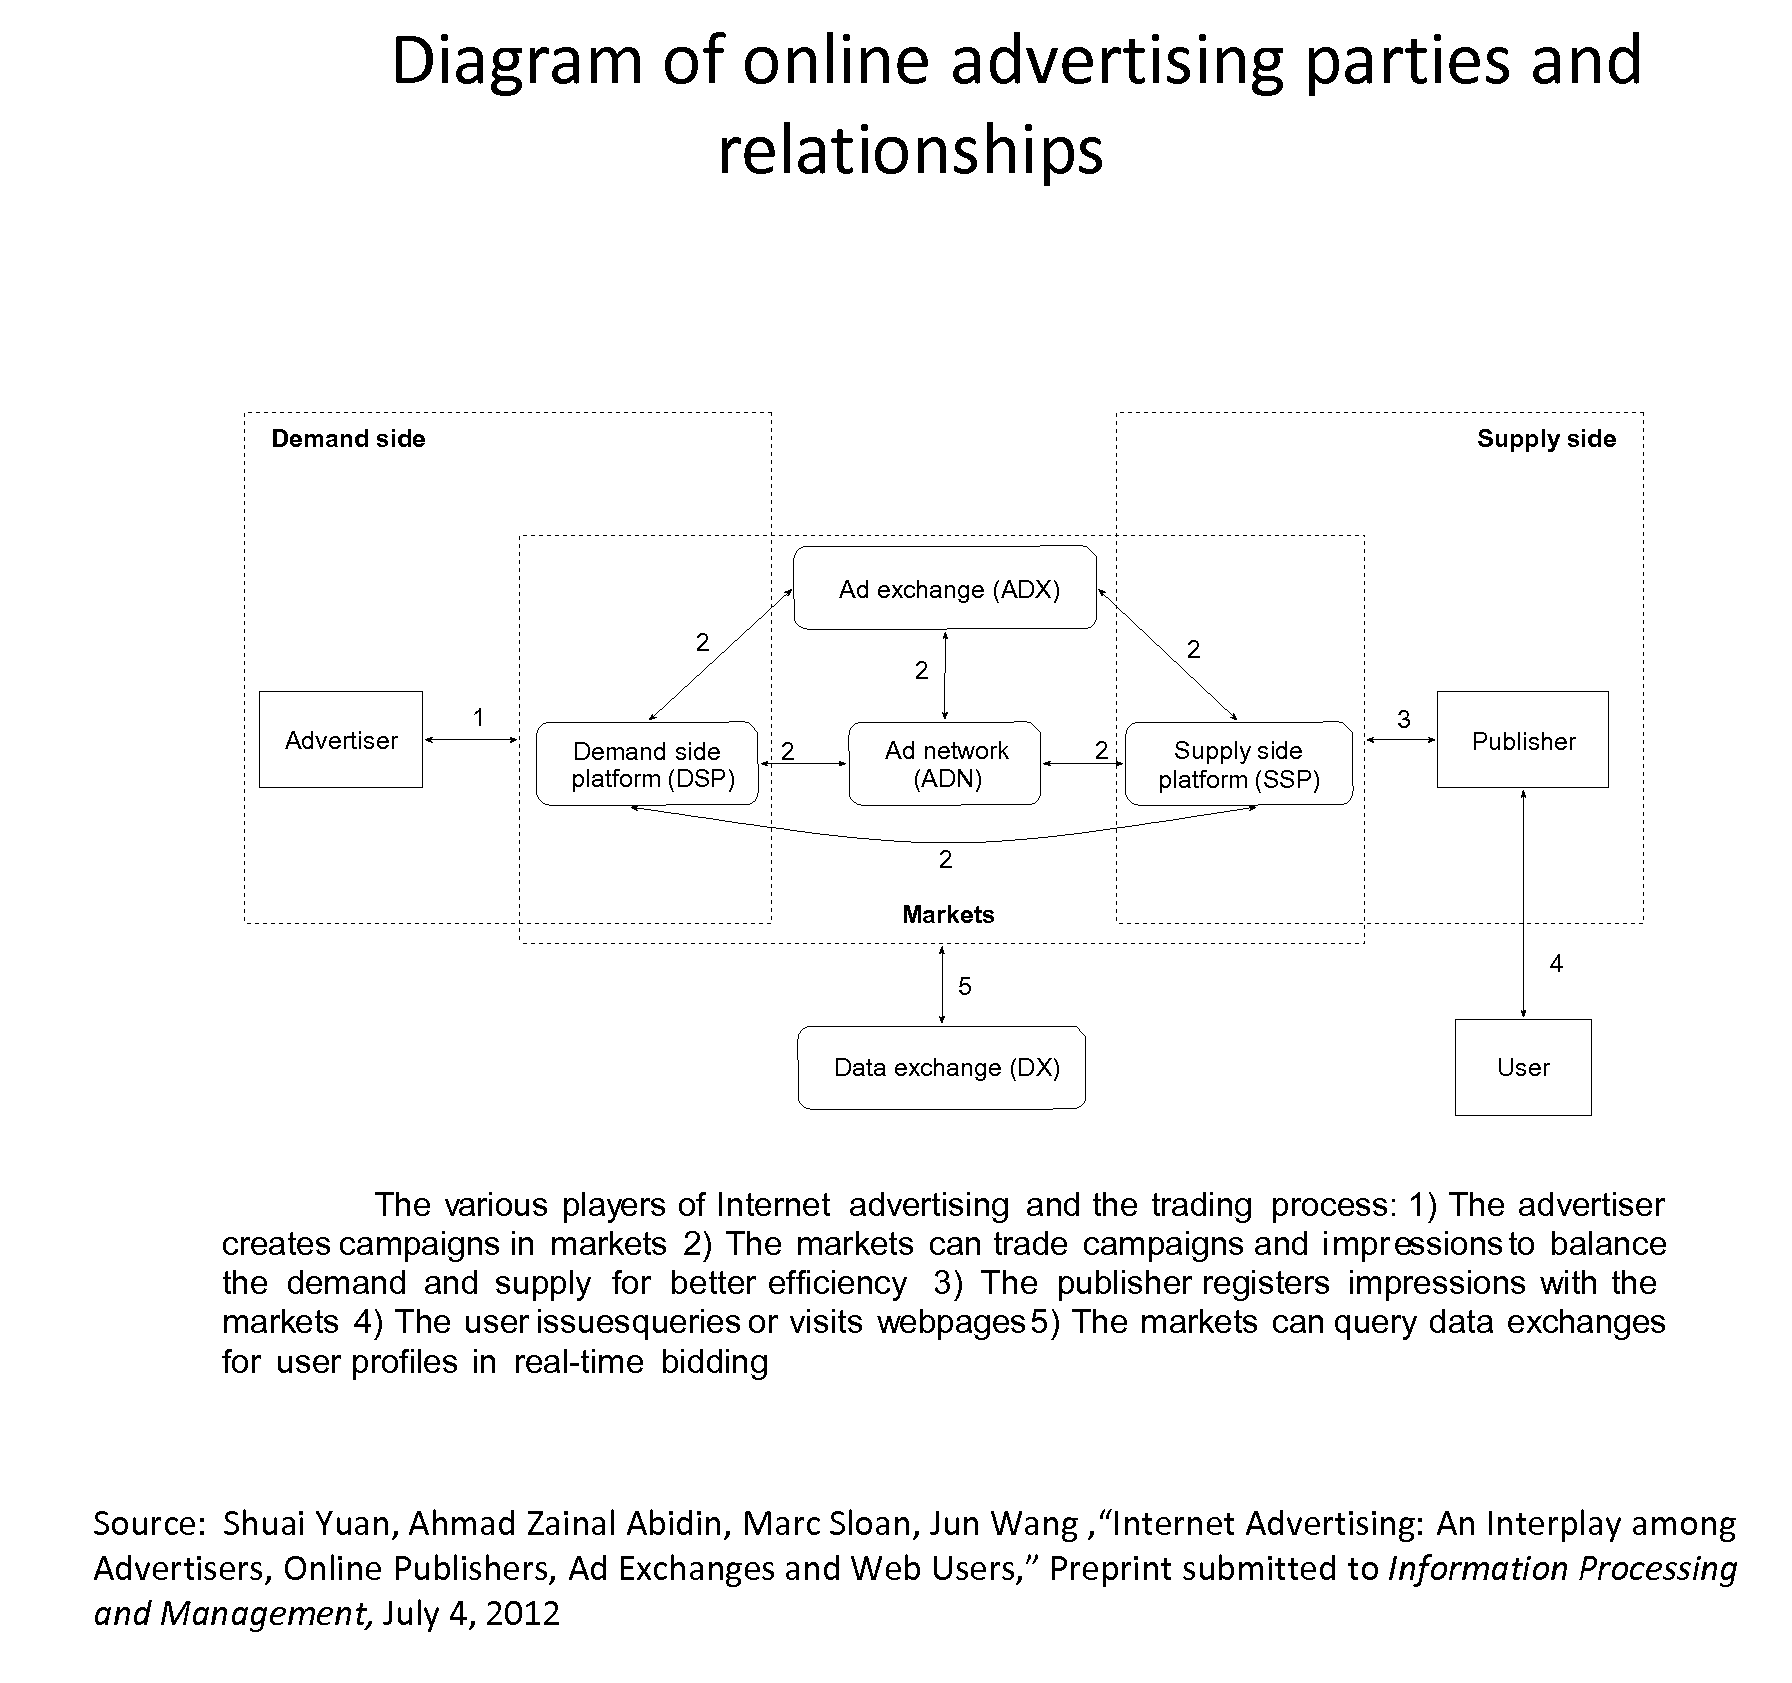 Process to Administer Mandatory Restrictions or Accede to User Preferences in a Distributed, Real-Time Market for Advertising to Mobile and Personal Devices